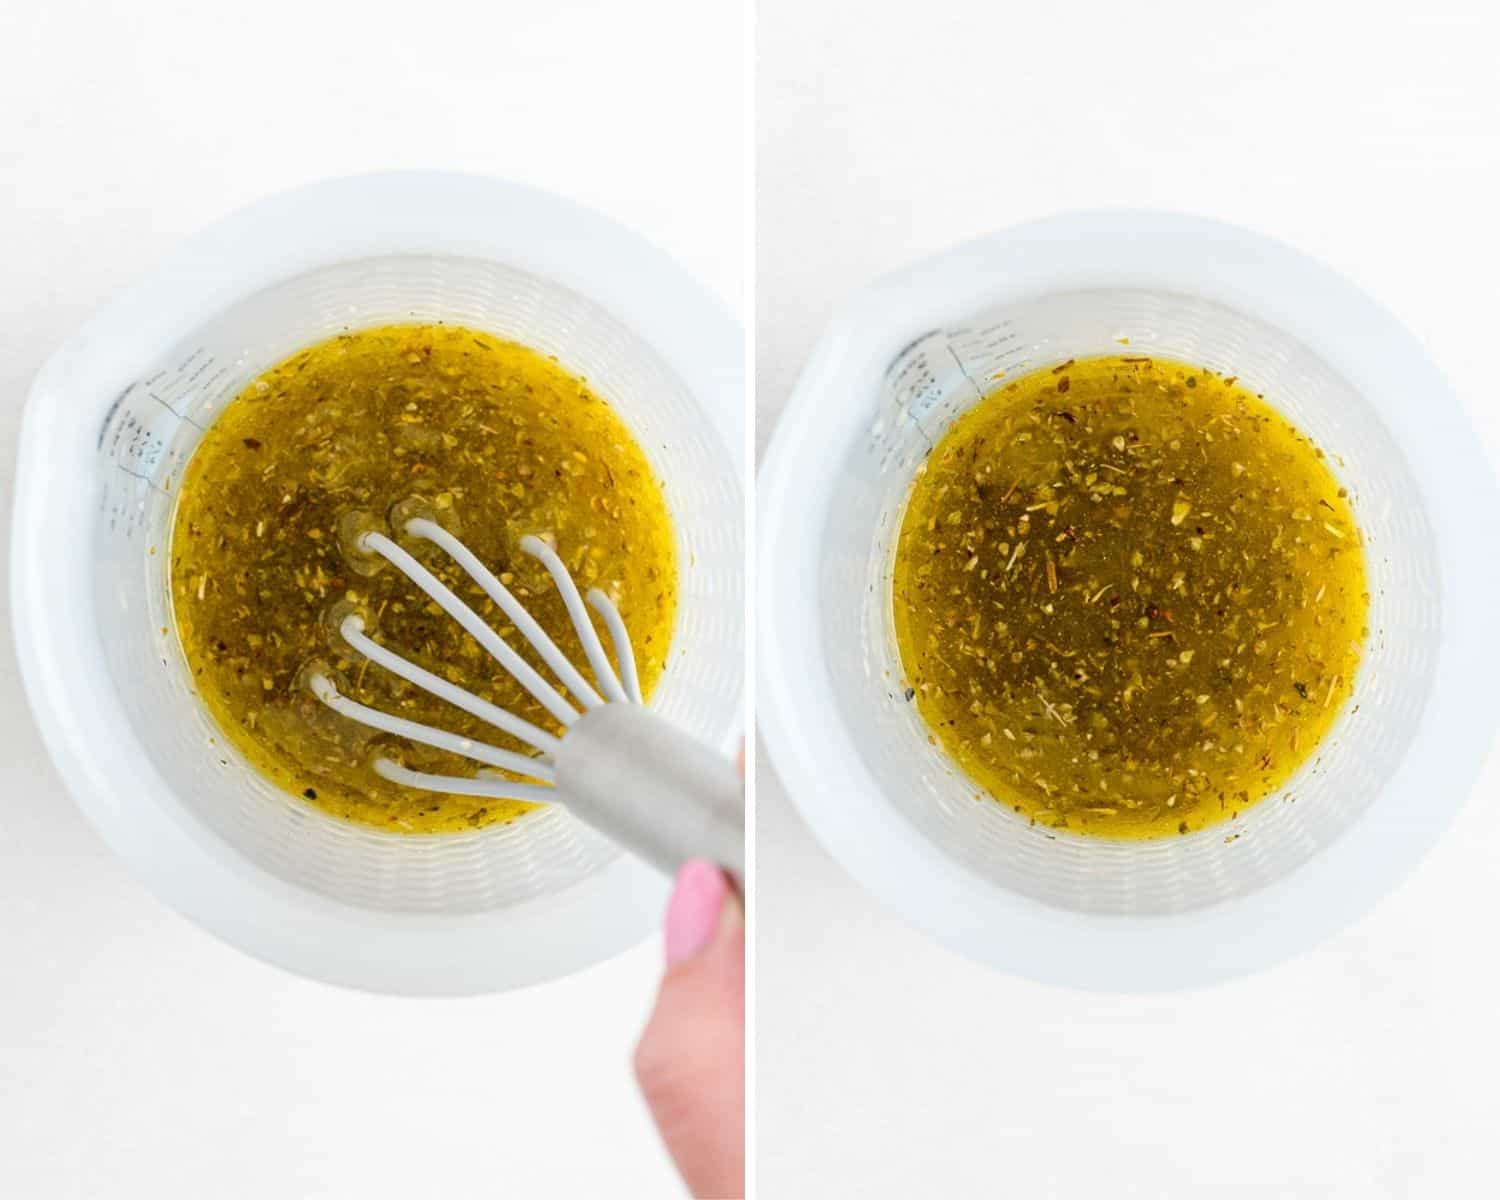 Two images of vinaigrette, one whisked, one not yet whisked.